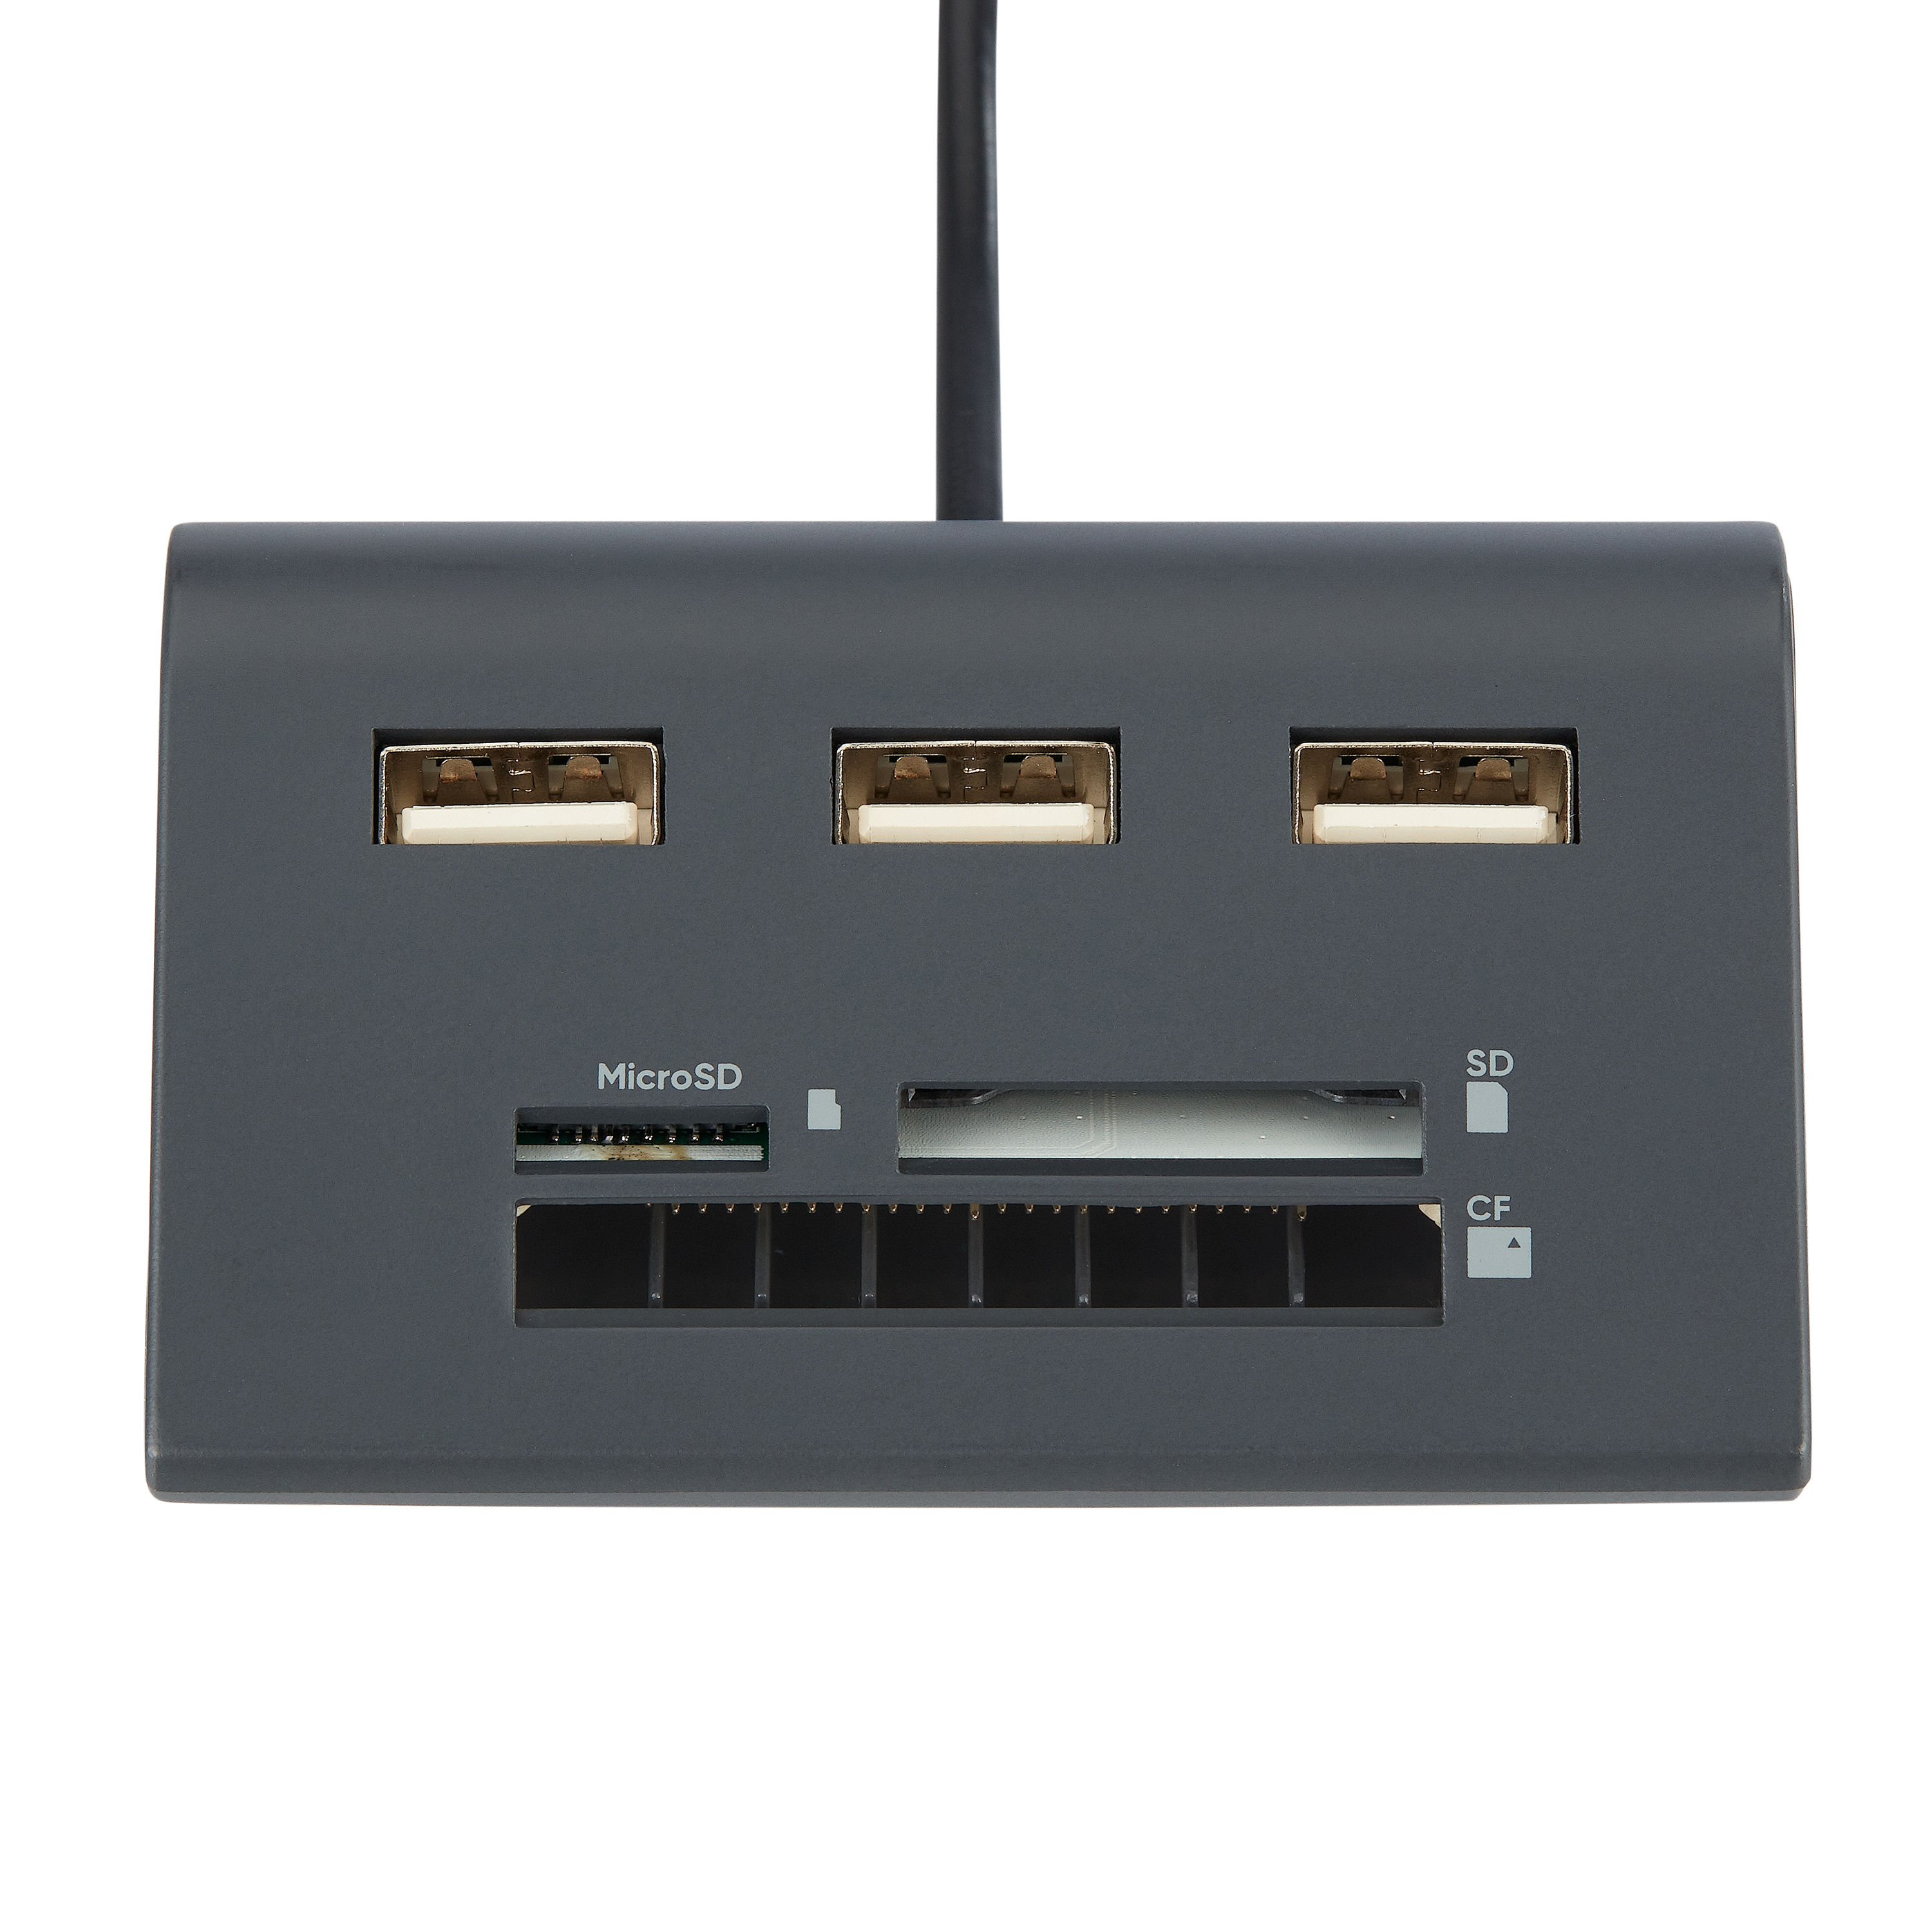 onn. Multi-Port USB Hub with SD, Micro SD and Compact Flash Card Reader - image 3 of 5